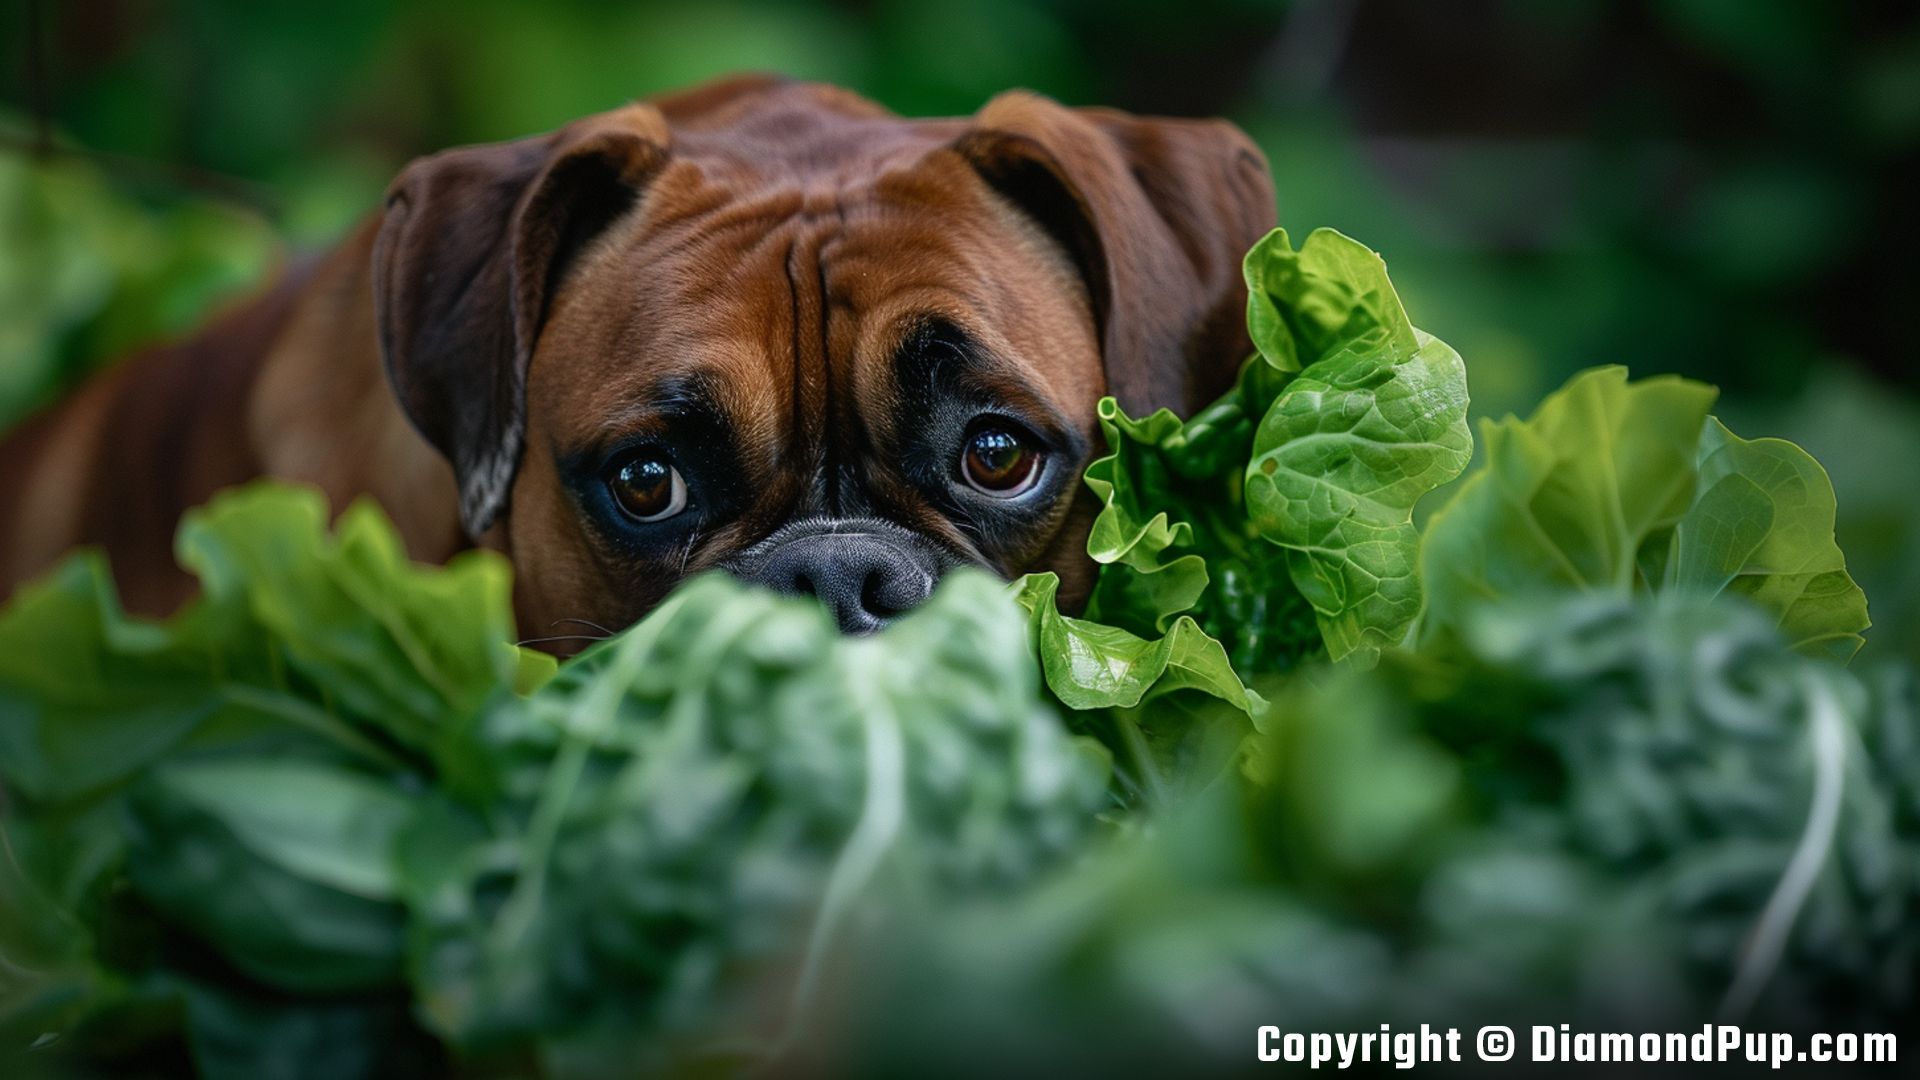 Image of an Adorable Boxer Snacking on Lettuce